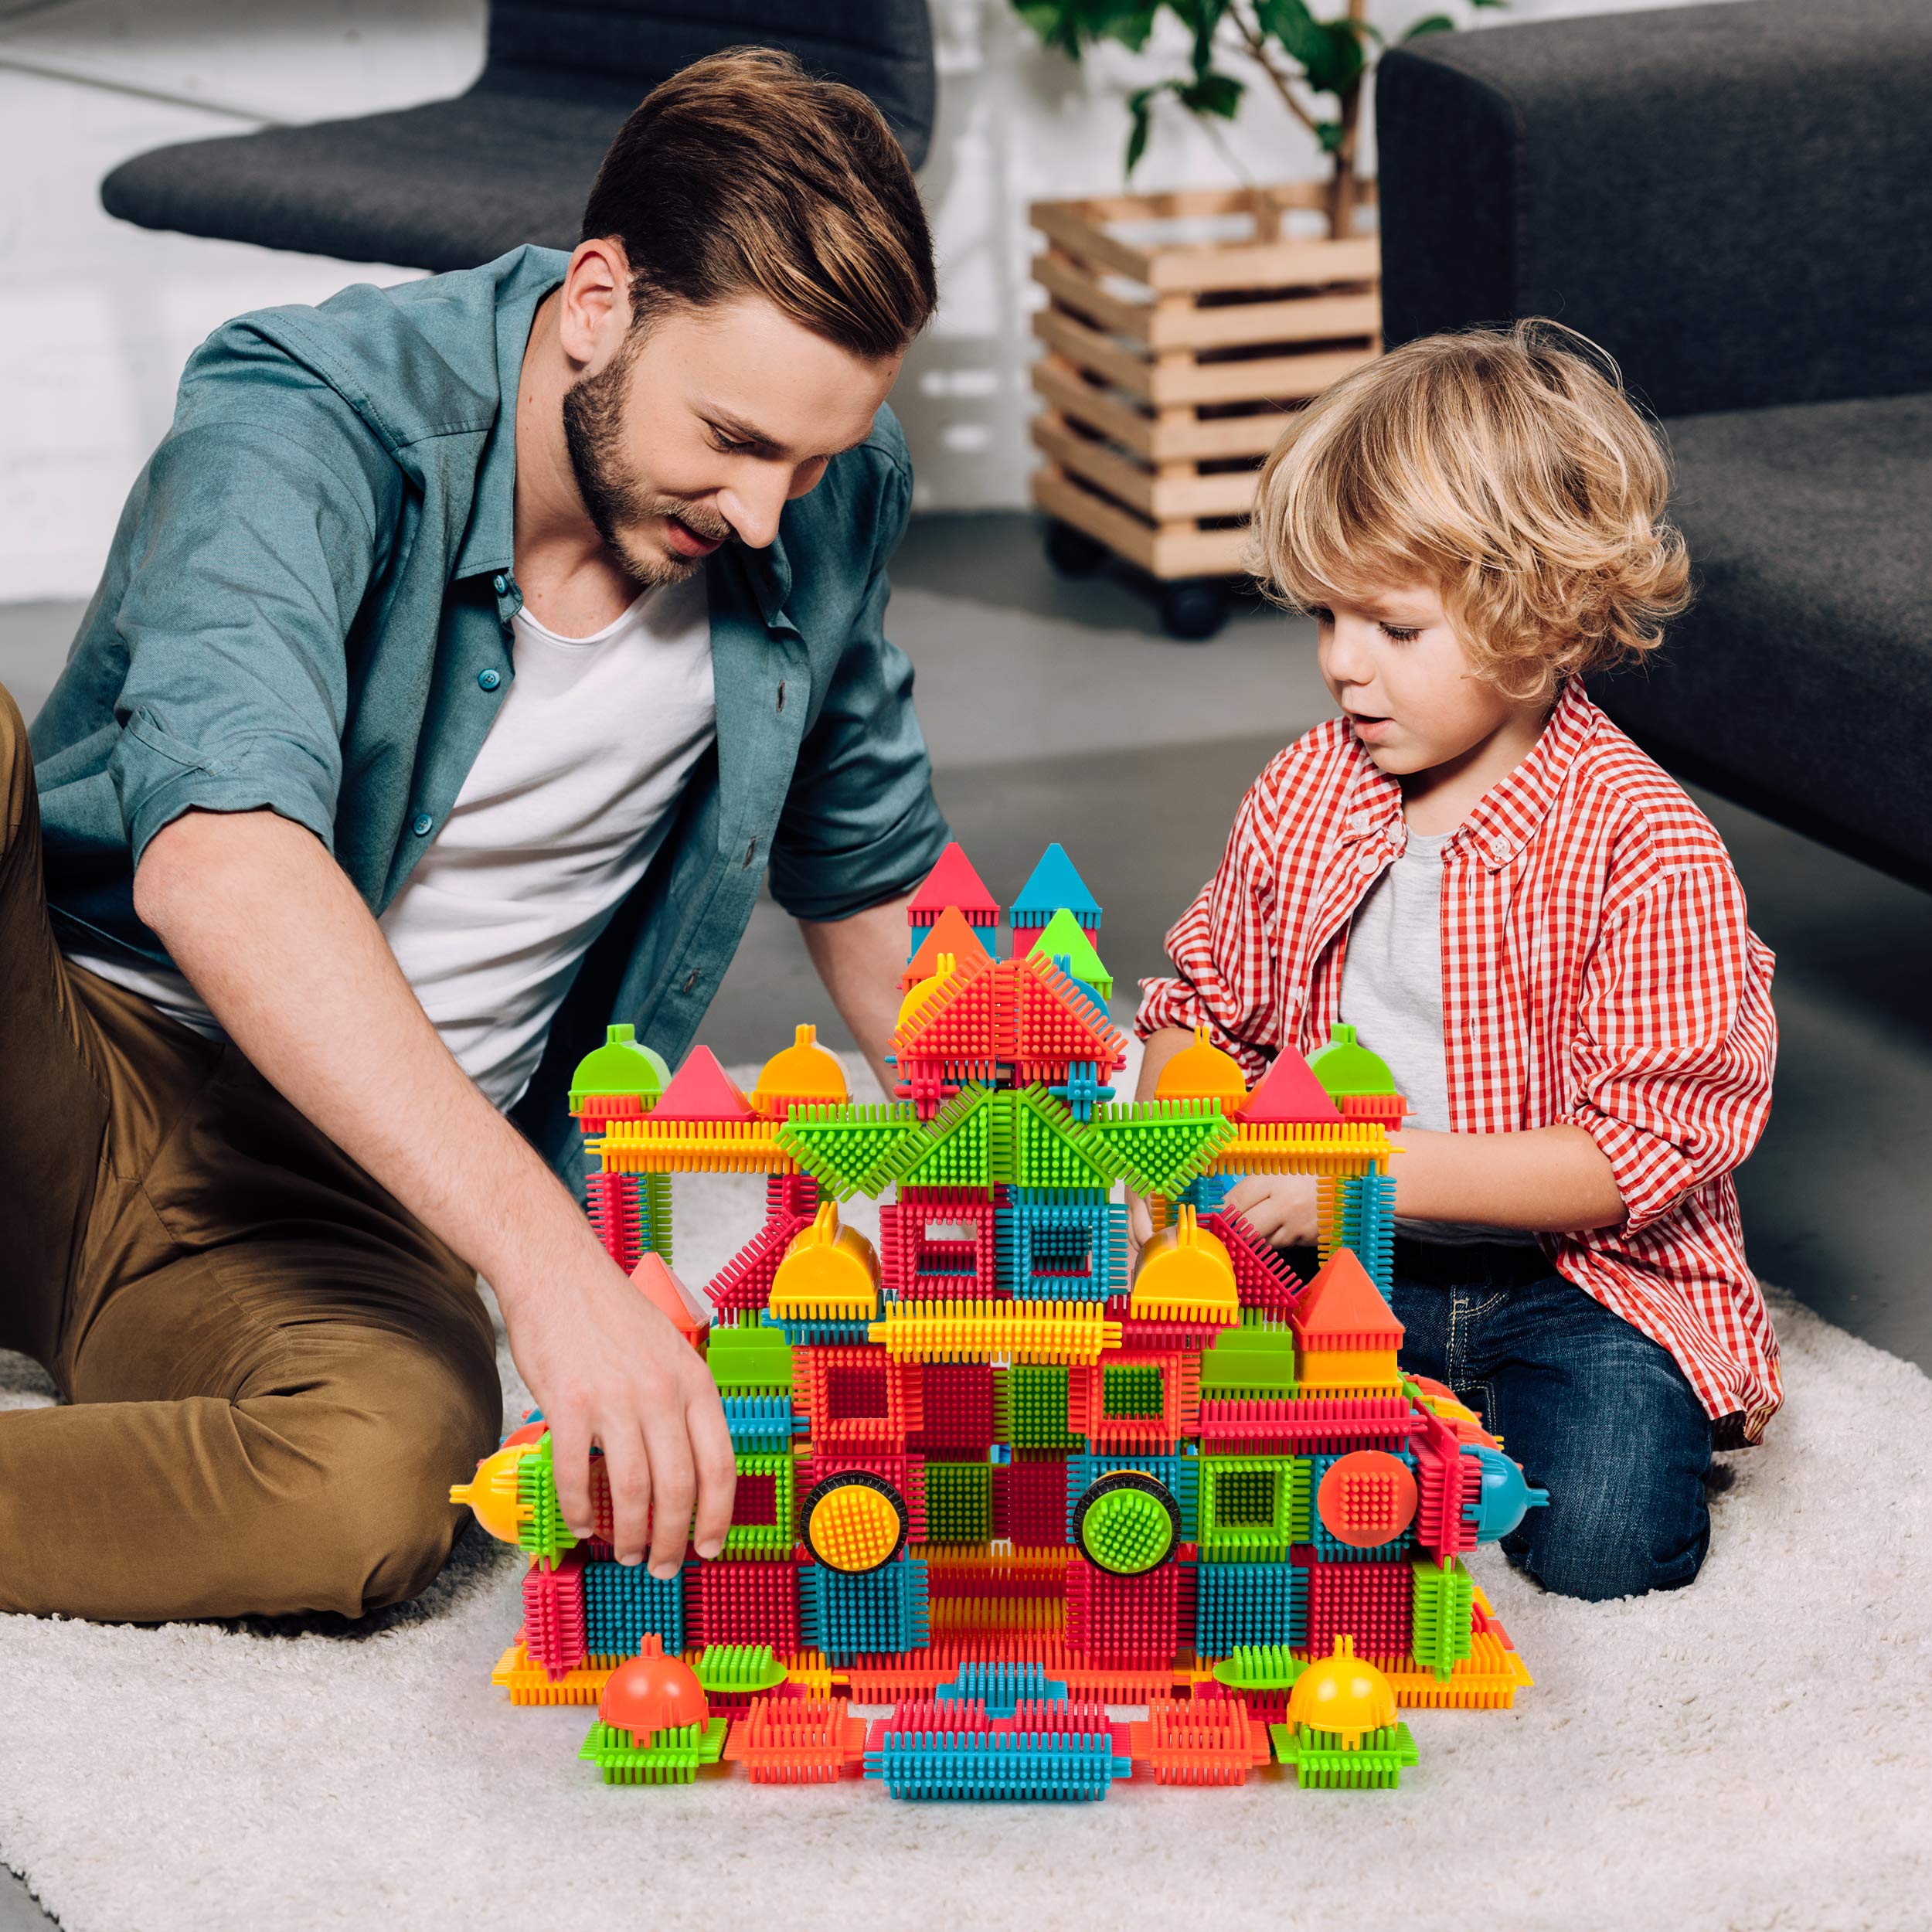 240pcs Bristle Lock Building Blocks+ Construction Engineering Kit Toy STEM Learning Toys Building Block Kids Early Education Playset w/Free IdeaBook, Power Drill, Clickable Ratchet Tiles Stacking Set